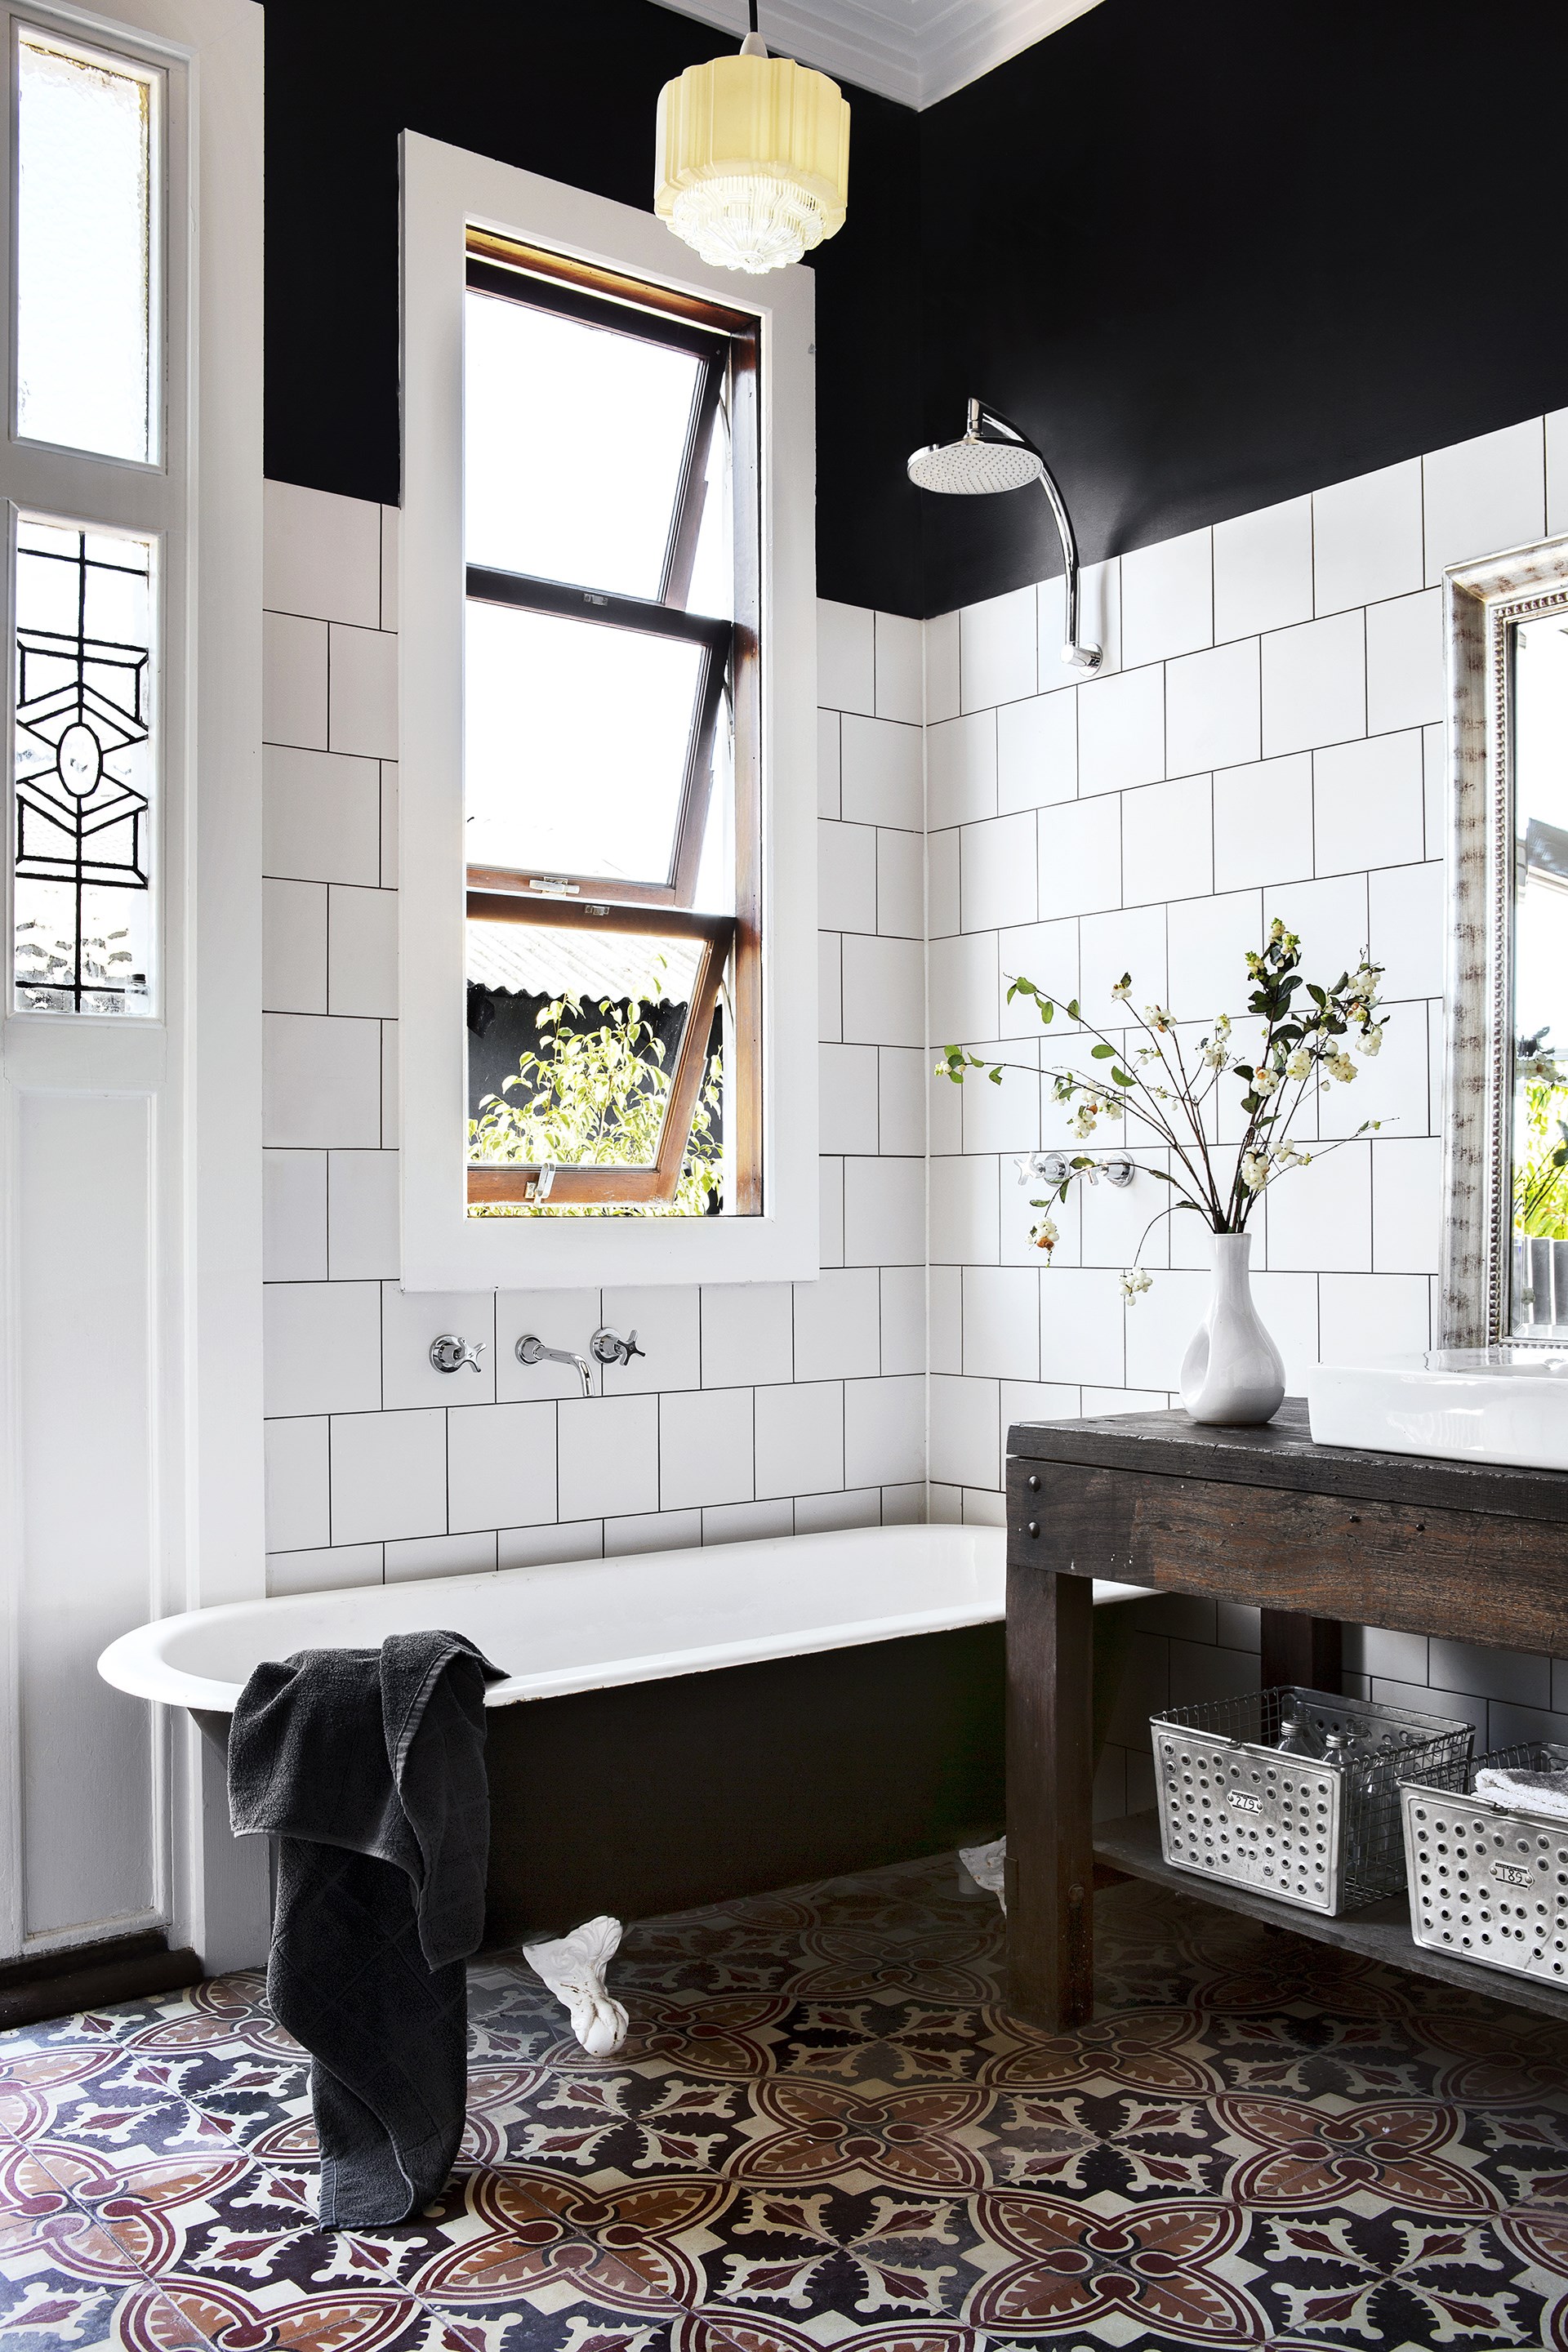 Trawling eBay to find these antique Spanish floor tiles was a real win for the bathroom within [this Art Deco-style home](http://www.homestolove.com.au/gallery-carla-and-bens-art-deco-style-new-house-1798|target="_blank").